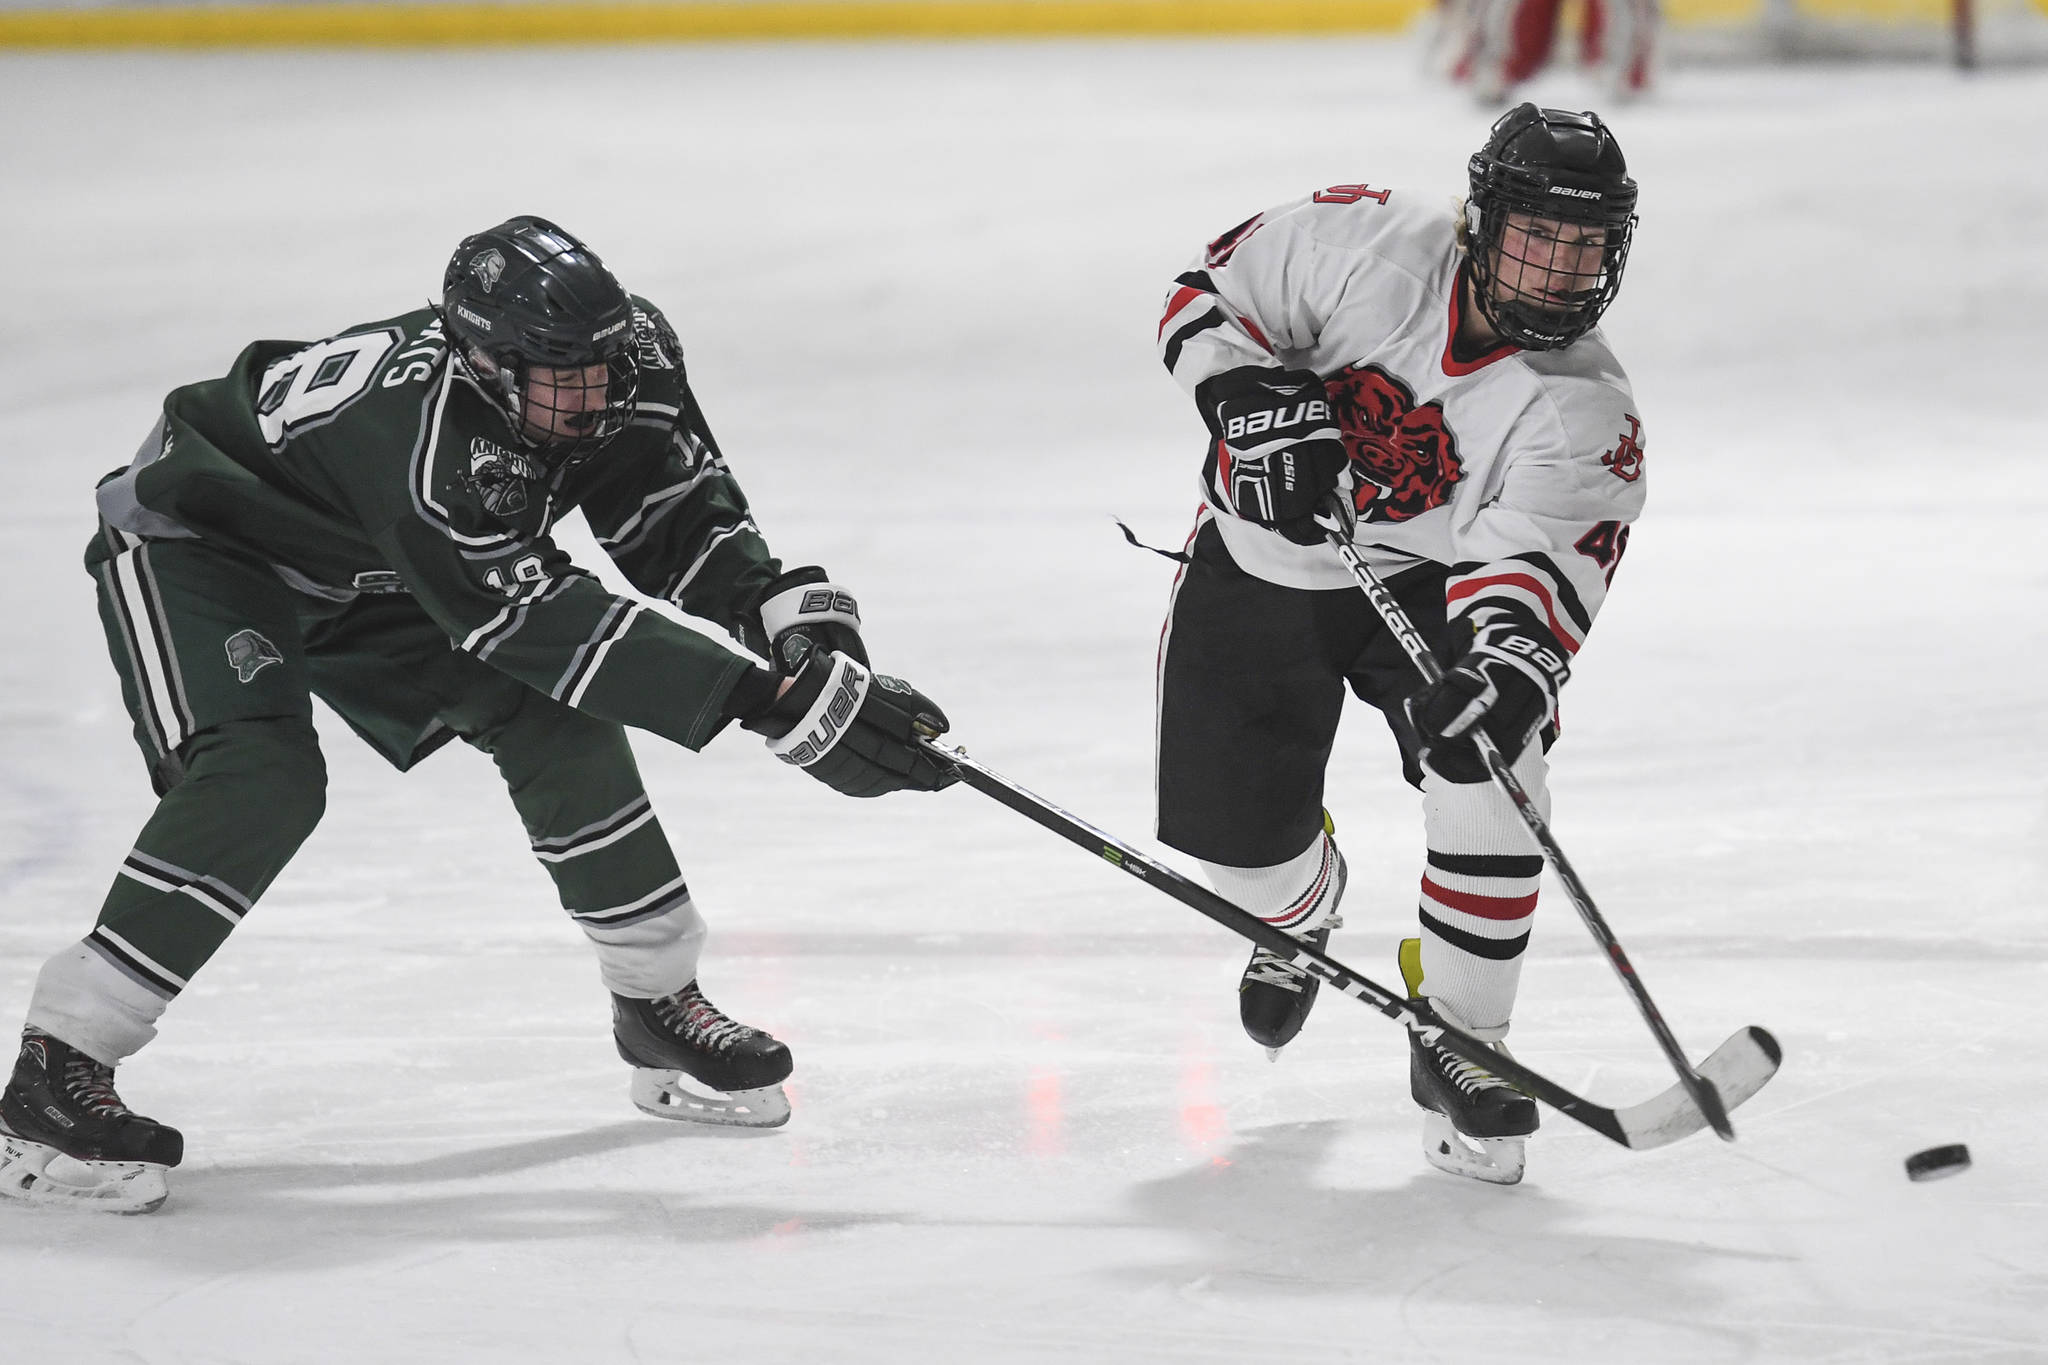 Juneau-Douglas’ Ethan Welch, right, passes the puck against Colony’s Tyler Keefe at Treadwell Arena on Friday, Nov. 22, 2019. (Michael Penn | Juneau Empire)